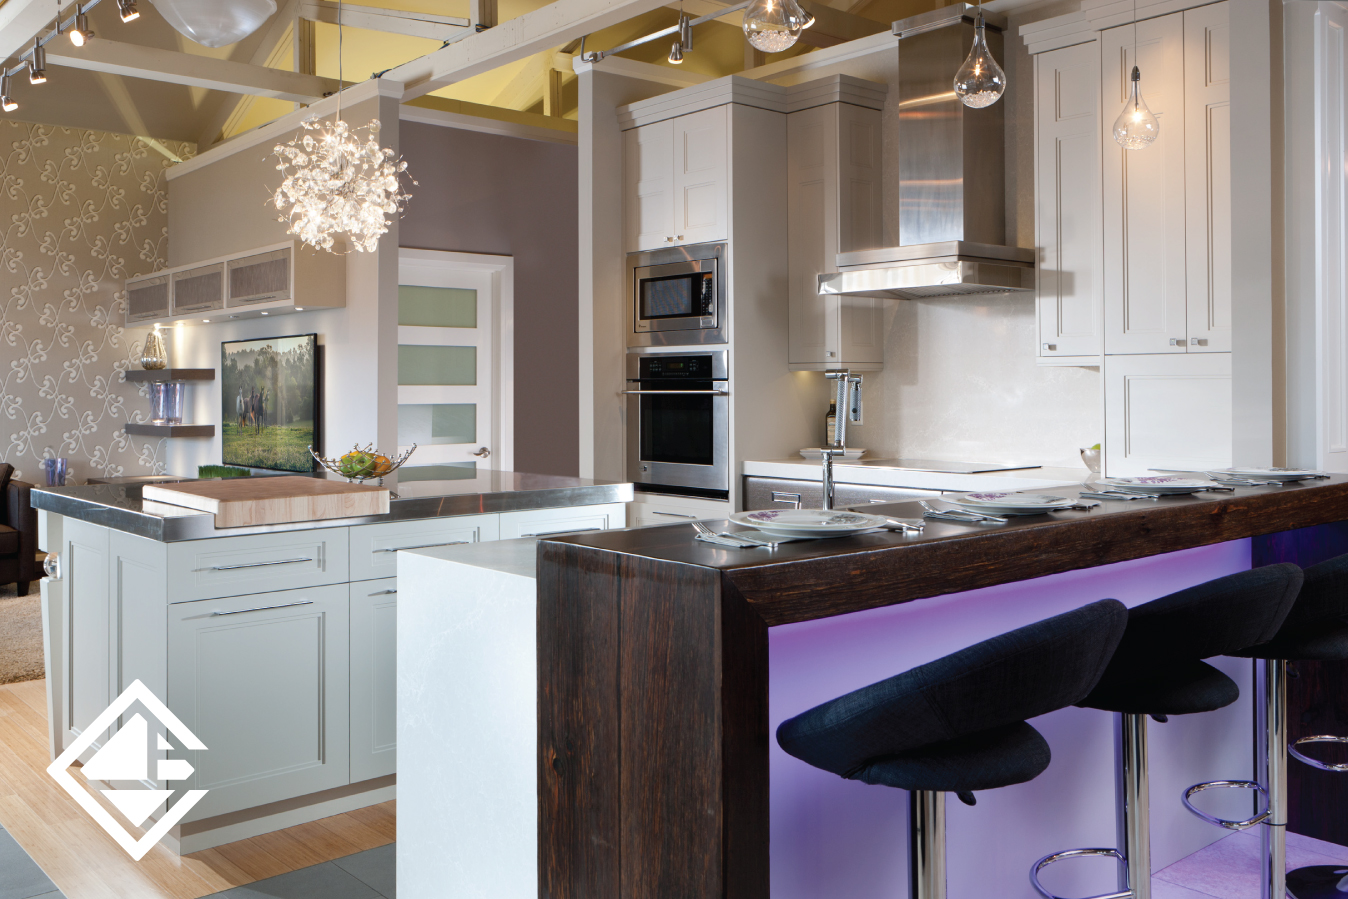 5 Pops of Colour to Consider for Your Kitchen | Purple Lighting Under Island